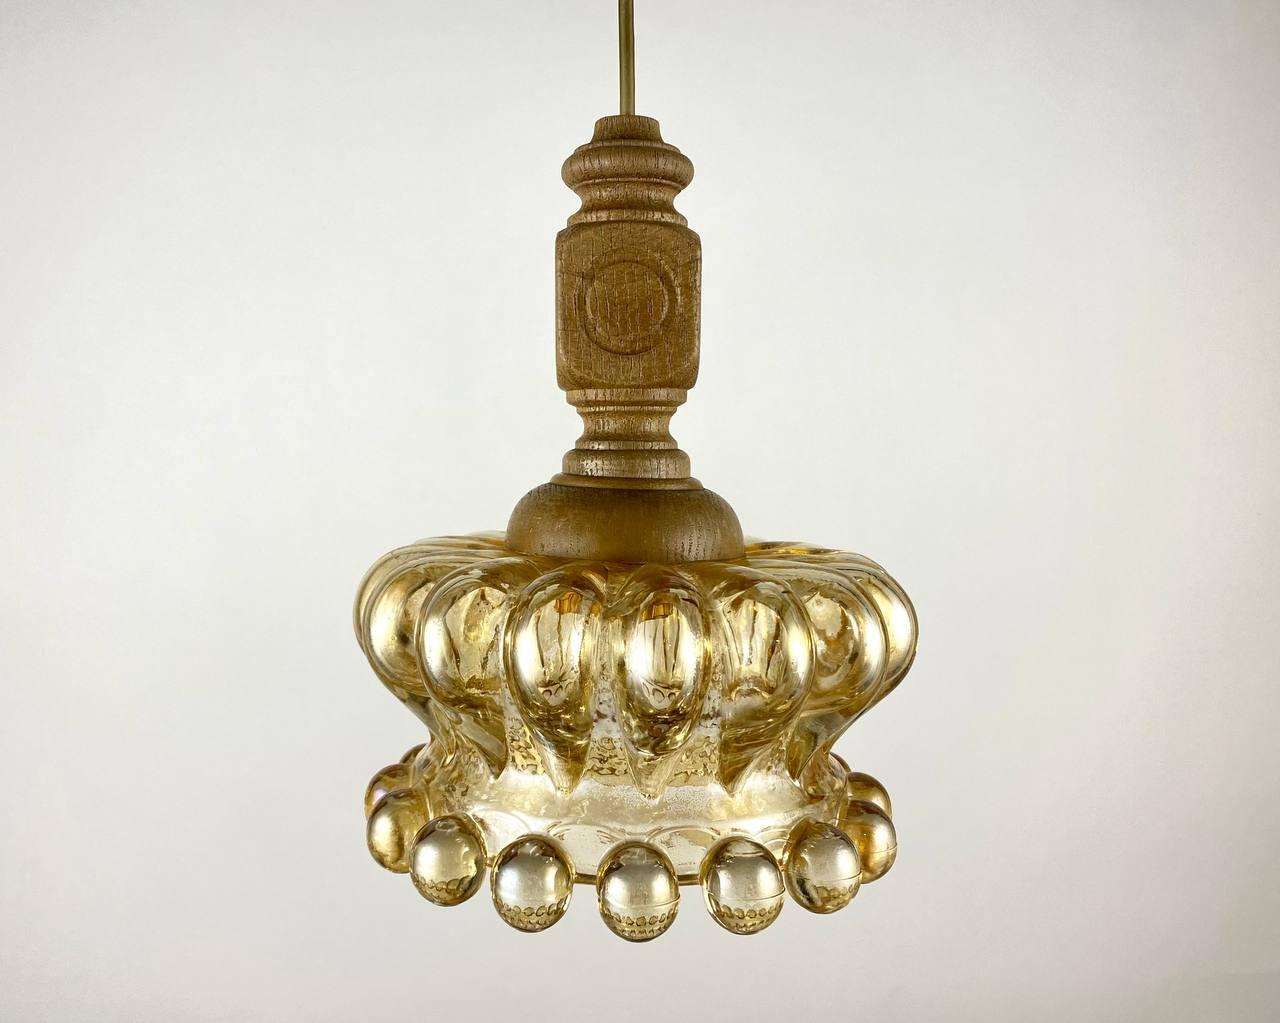 Vintage Ceiling Chandelier  Unusual Glass And Wooden Hanging Lamp By ME Marbach In Excellent Condition For Sale In Bastogne, BE